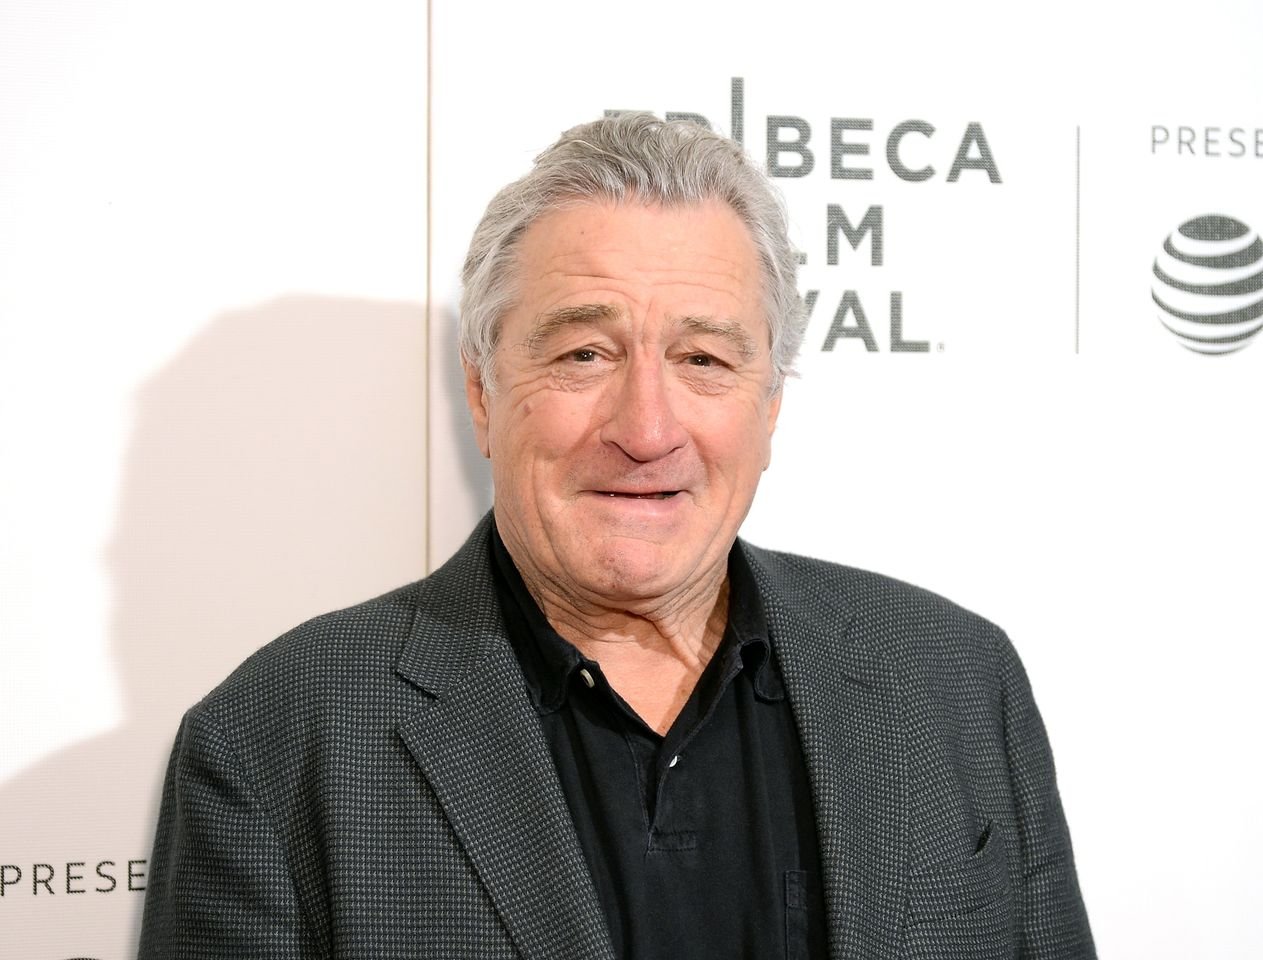 Robert De Niro attends the DIRECTTV Premiere Of "Women Walks Ahead" At 2018 Tribeca Film Festival on April 25, 2018 in New York City. | Source: Getty Images